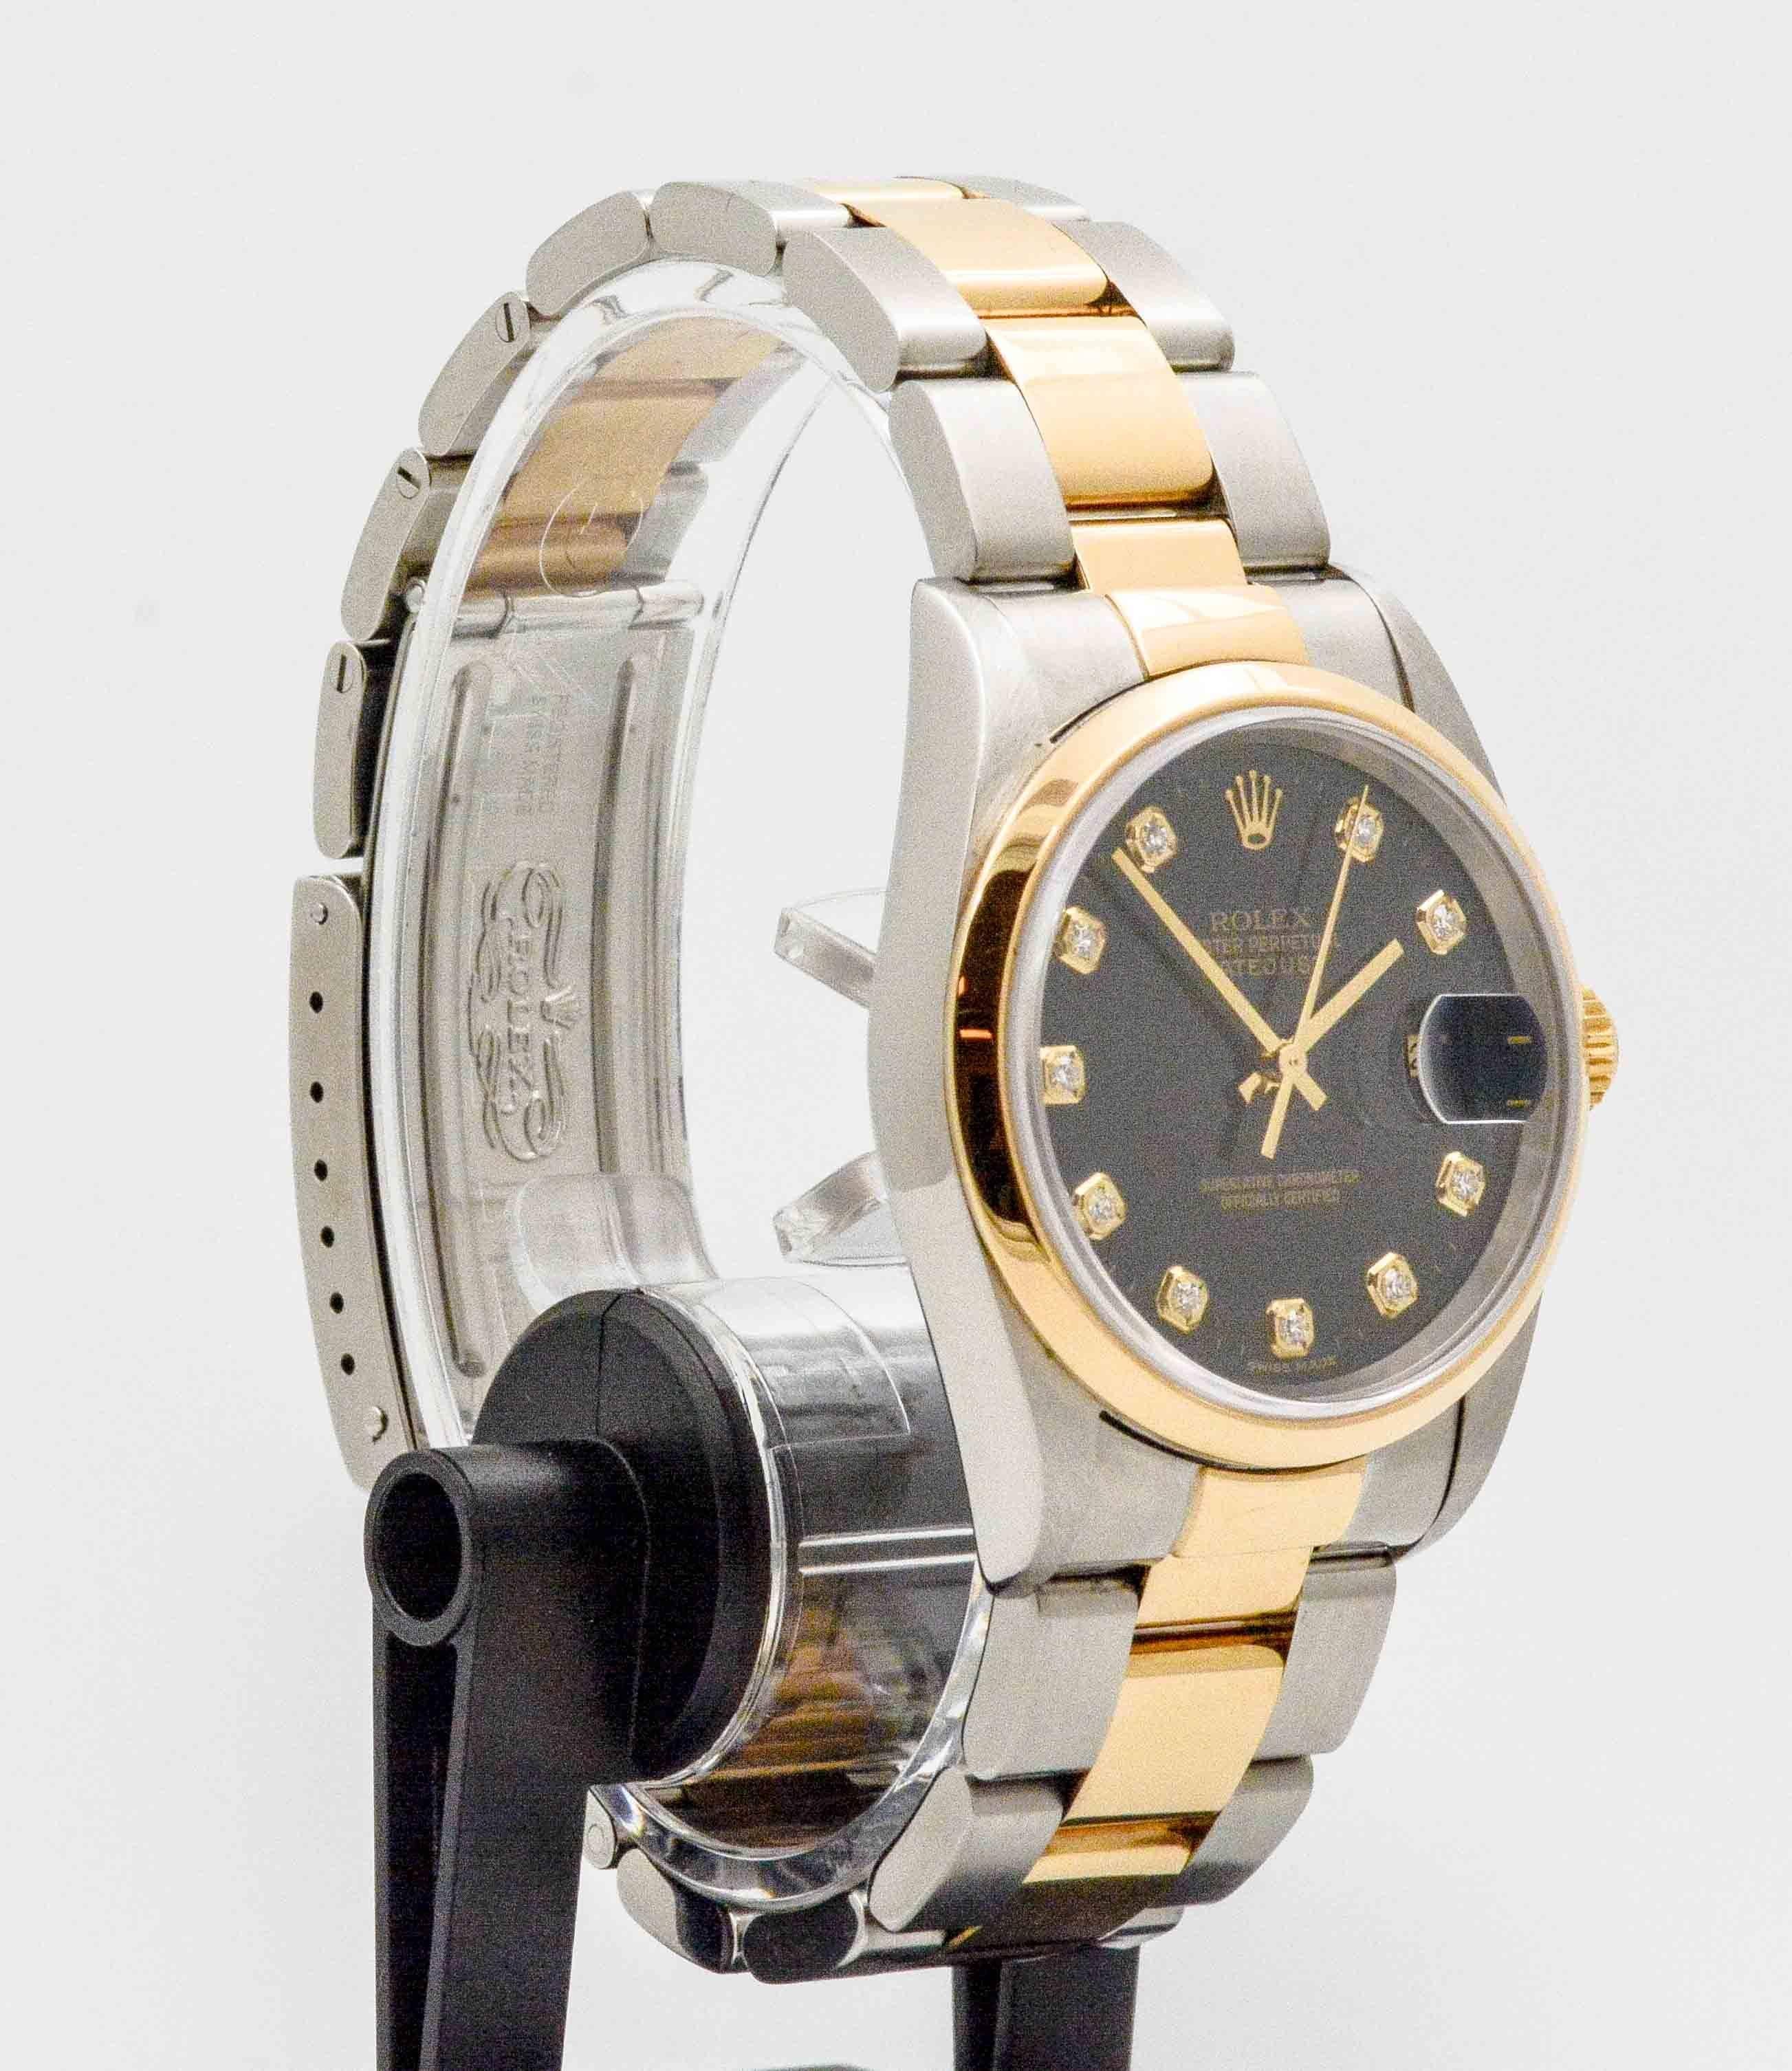 An elegant Certified Pre-Owned Rolex Datejust, 16203 - Men's automatic winding wristwatch. Stainless steel case with 18k yellow gold smooth bezel. Black dial with factory diamond hour markers. 36 mm. Stainless steel and 18k yellow gold Oyster